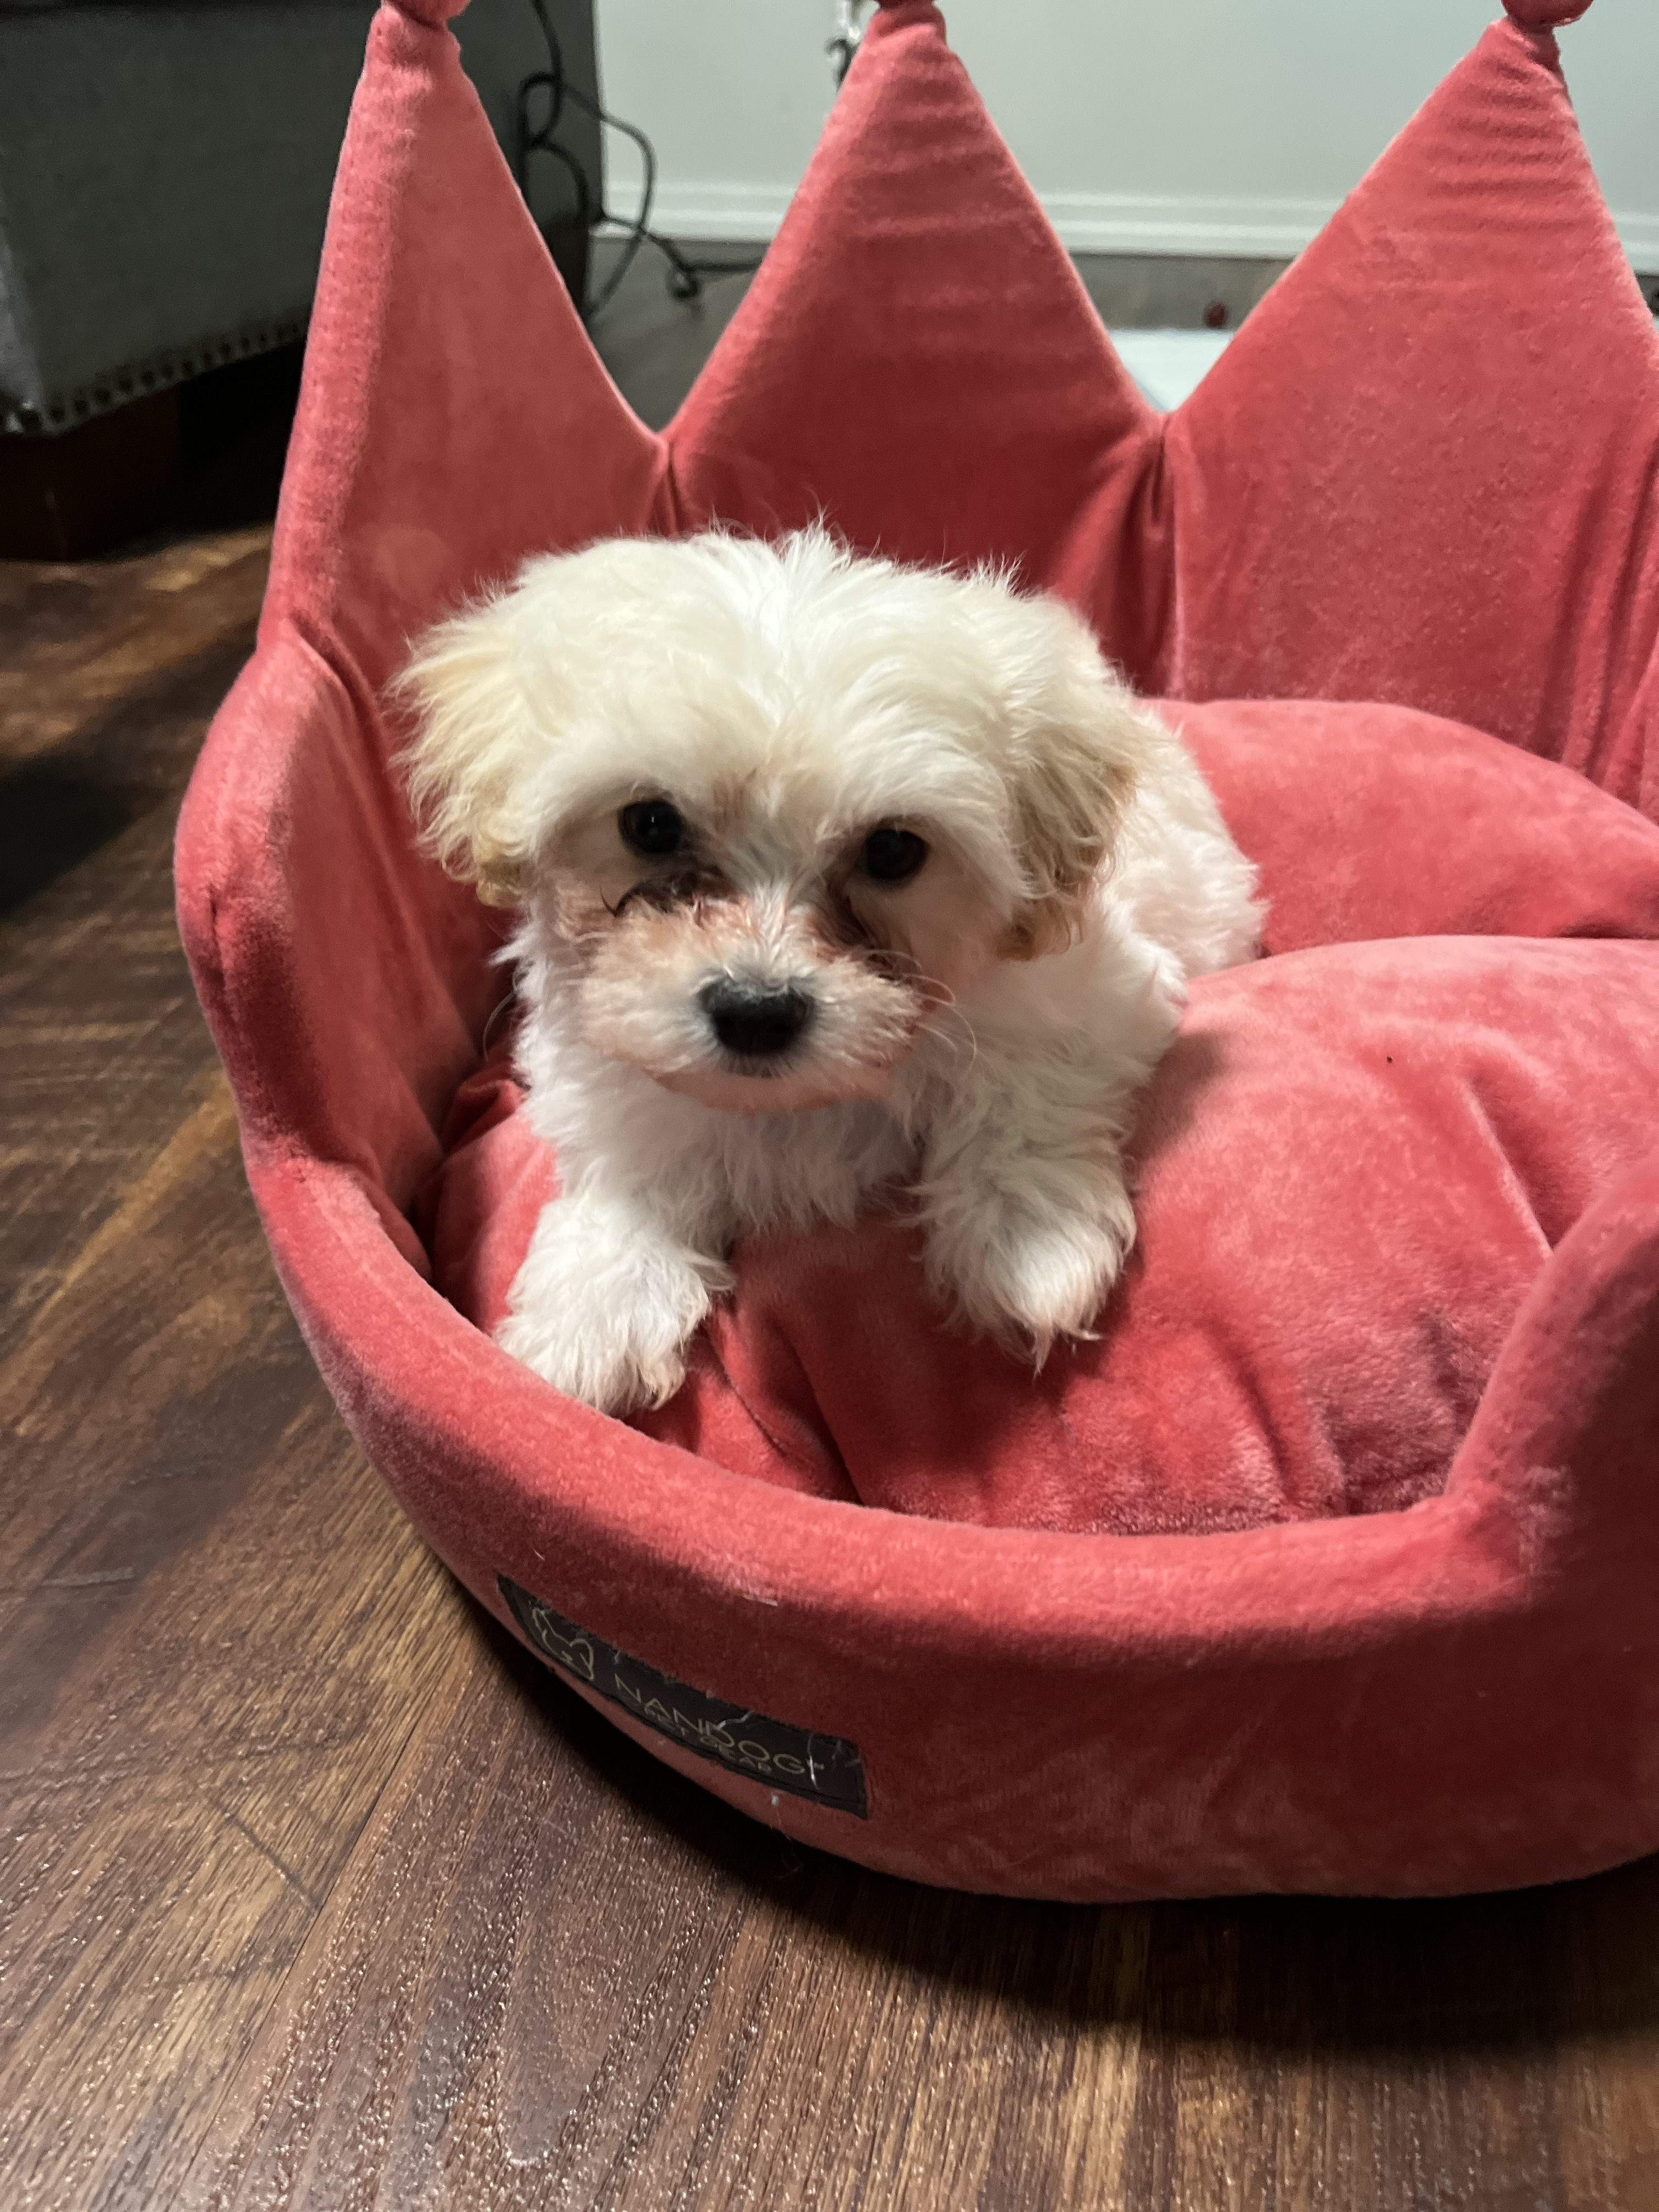 MALTESE 8 WEEKS OLD 2  MALTESE 8 WEEKS OLD 2 female and 1 male Maltese puppies ready to find their forever homes. 8 weeks old, has their 6 week shots. Please contact Alissa at 208-819-3485 Rathdrum